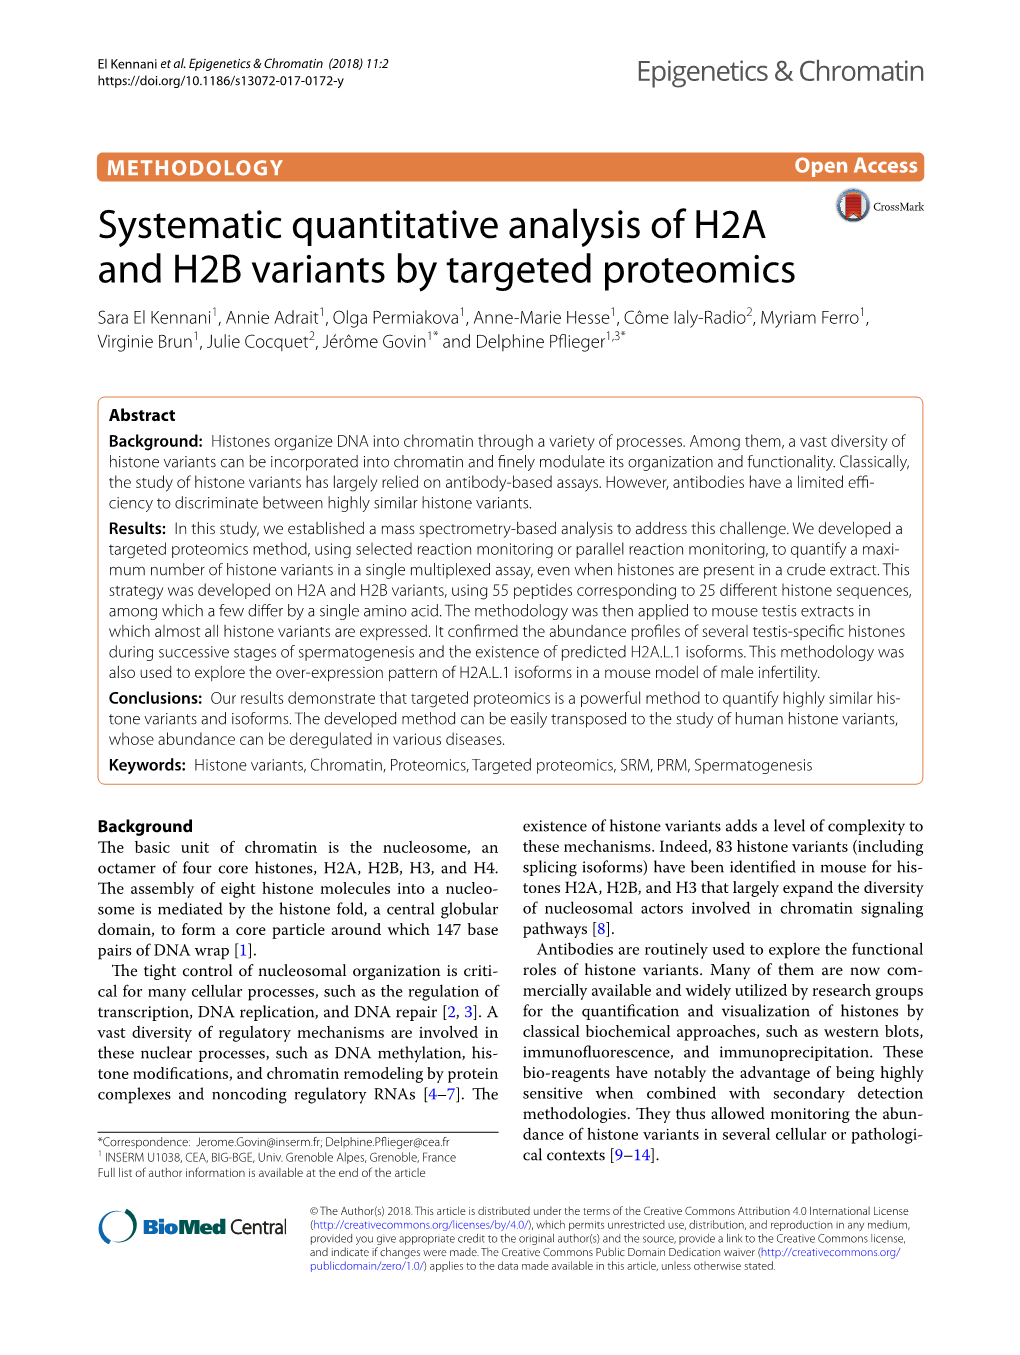 Systematic Quantitative Analysis of H2A And